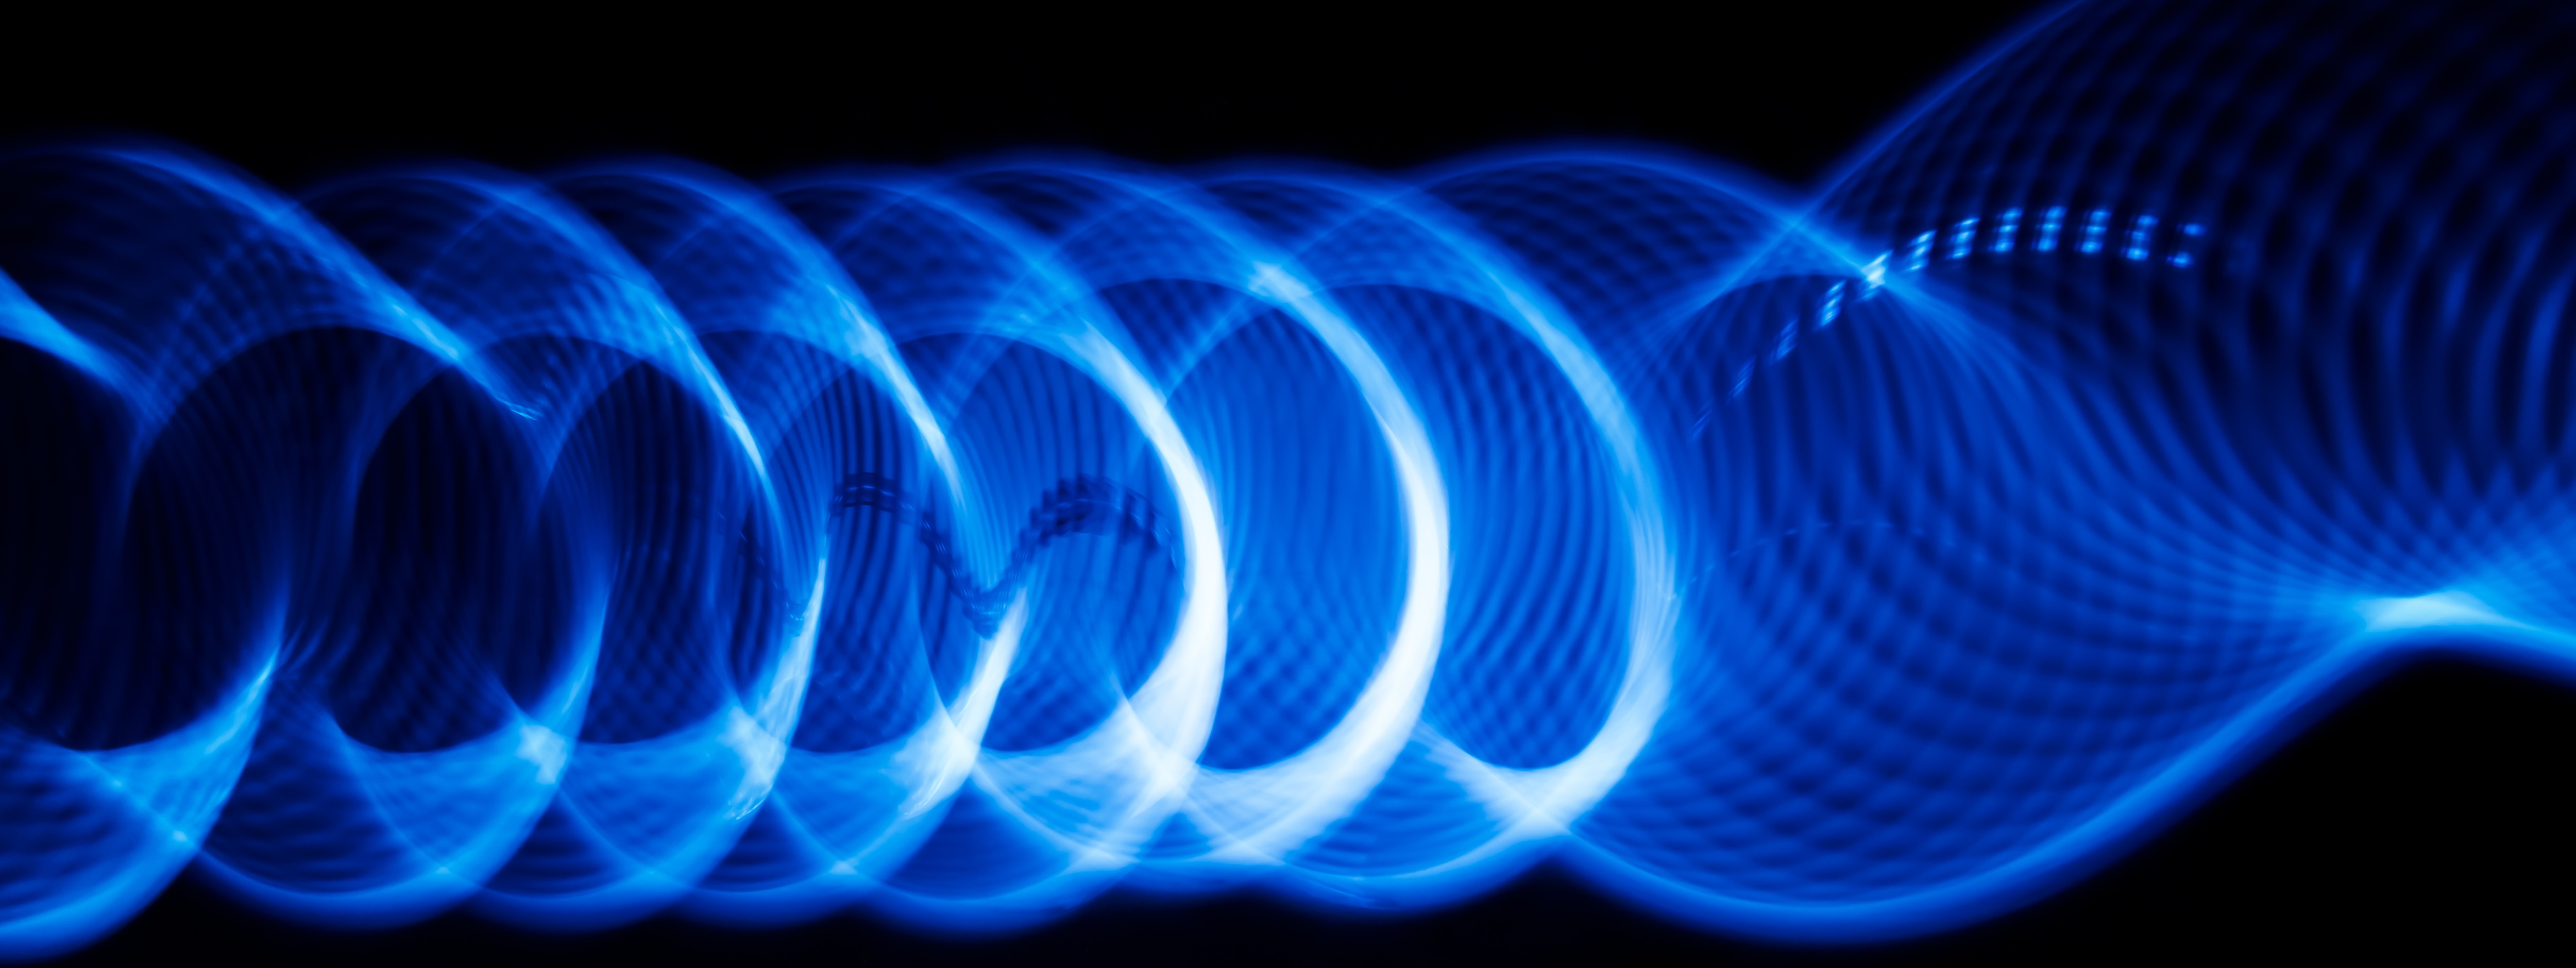 Light, sound, action: extending the life of acoustic waves on